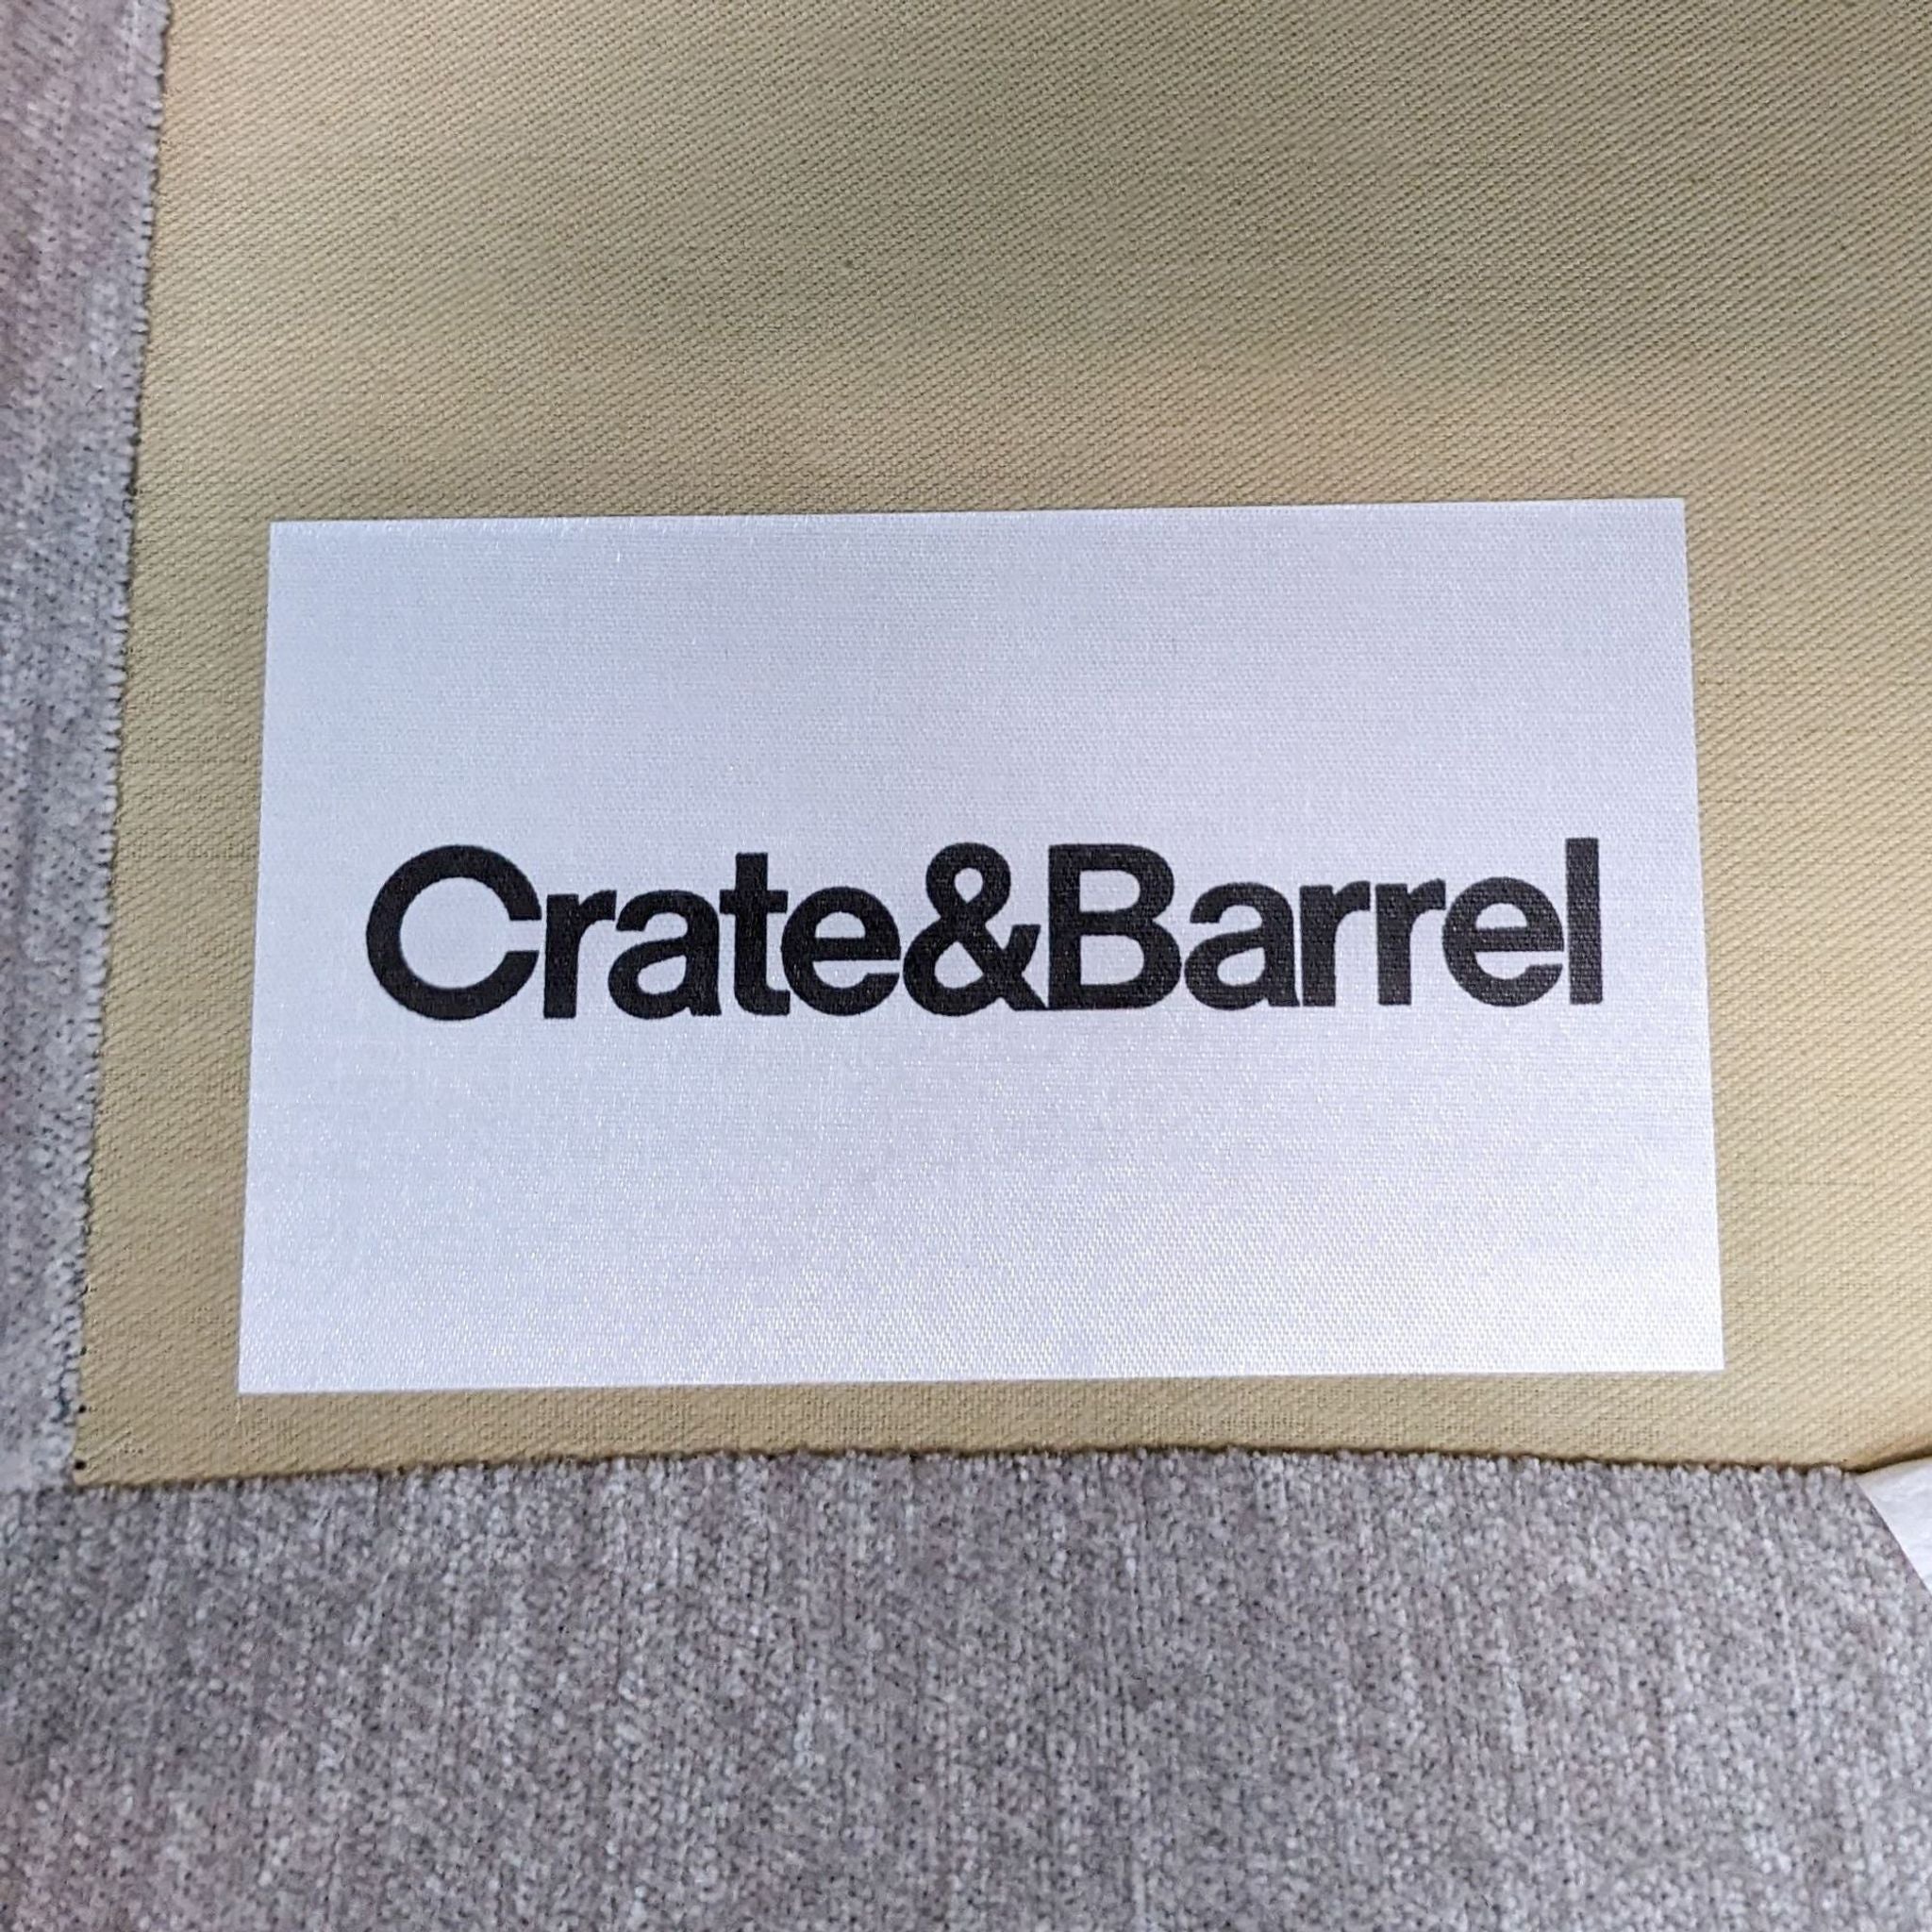 3. Crate & Barrel branding logo on a label with a grey upholstered sofa background, representing modern furniture style.